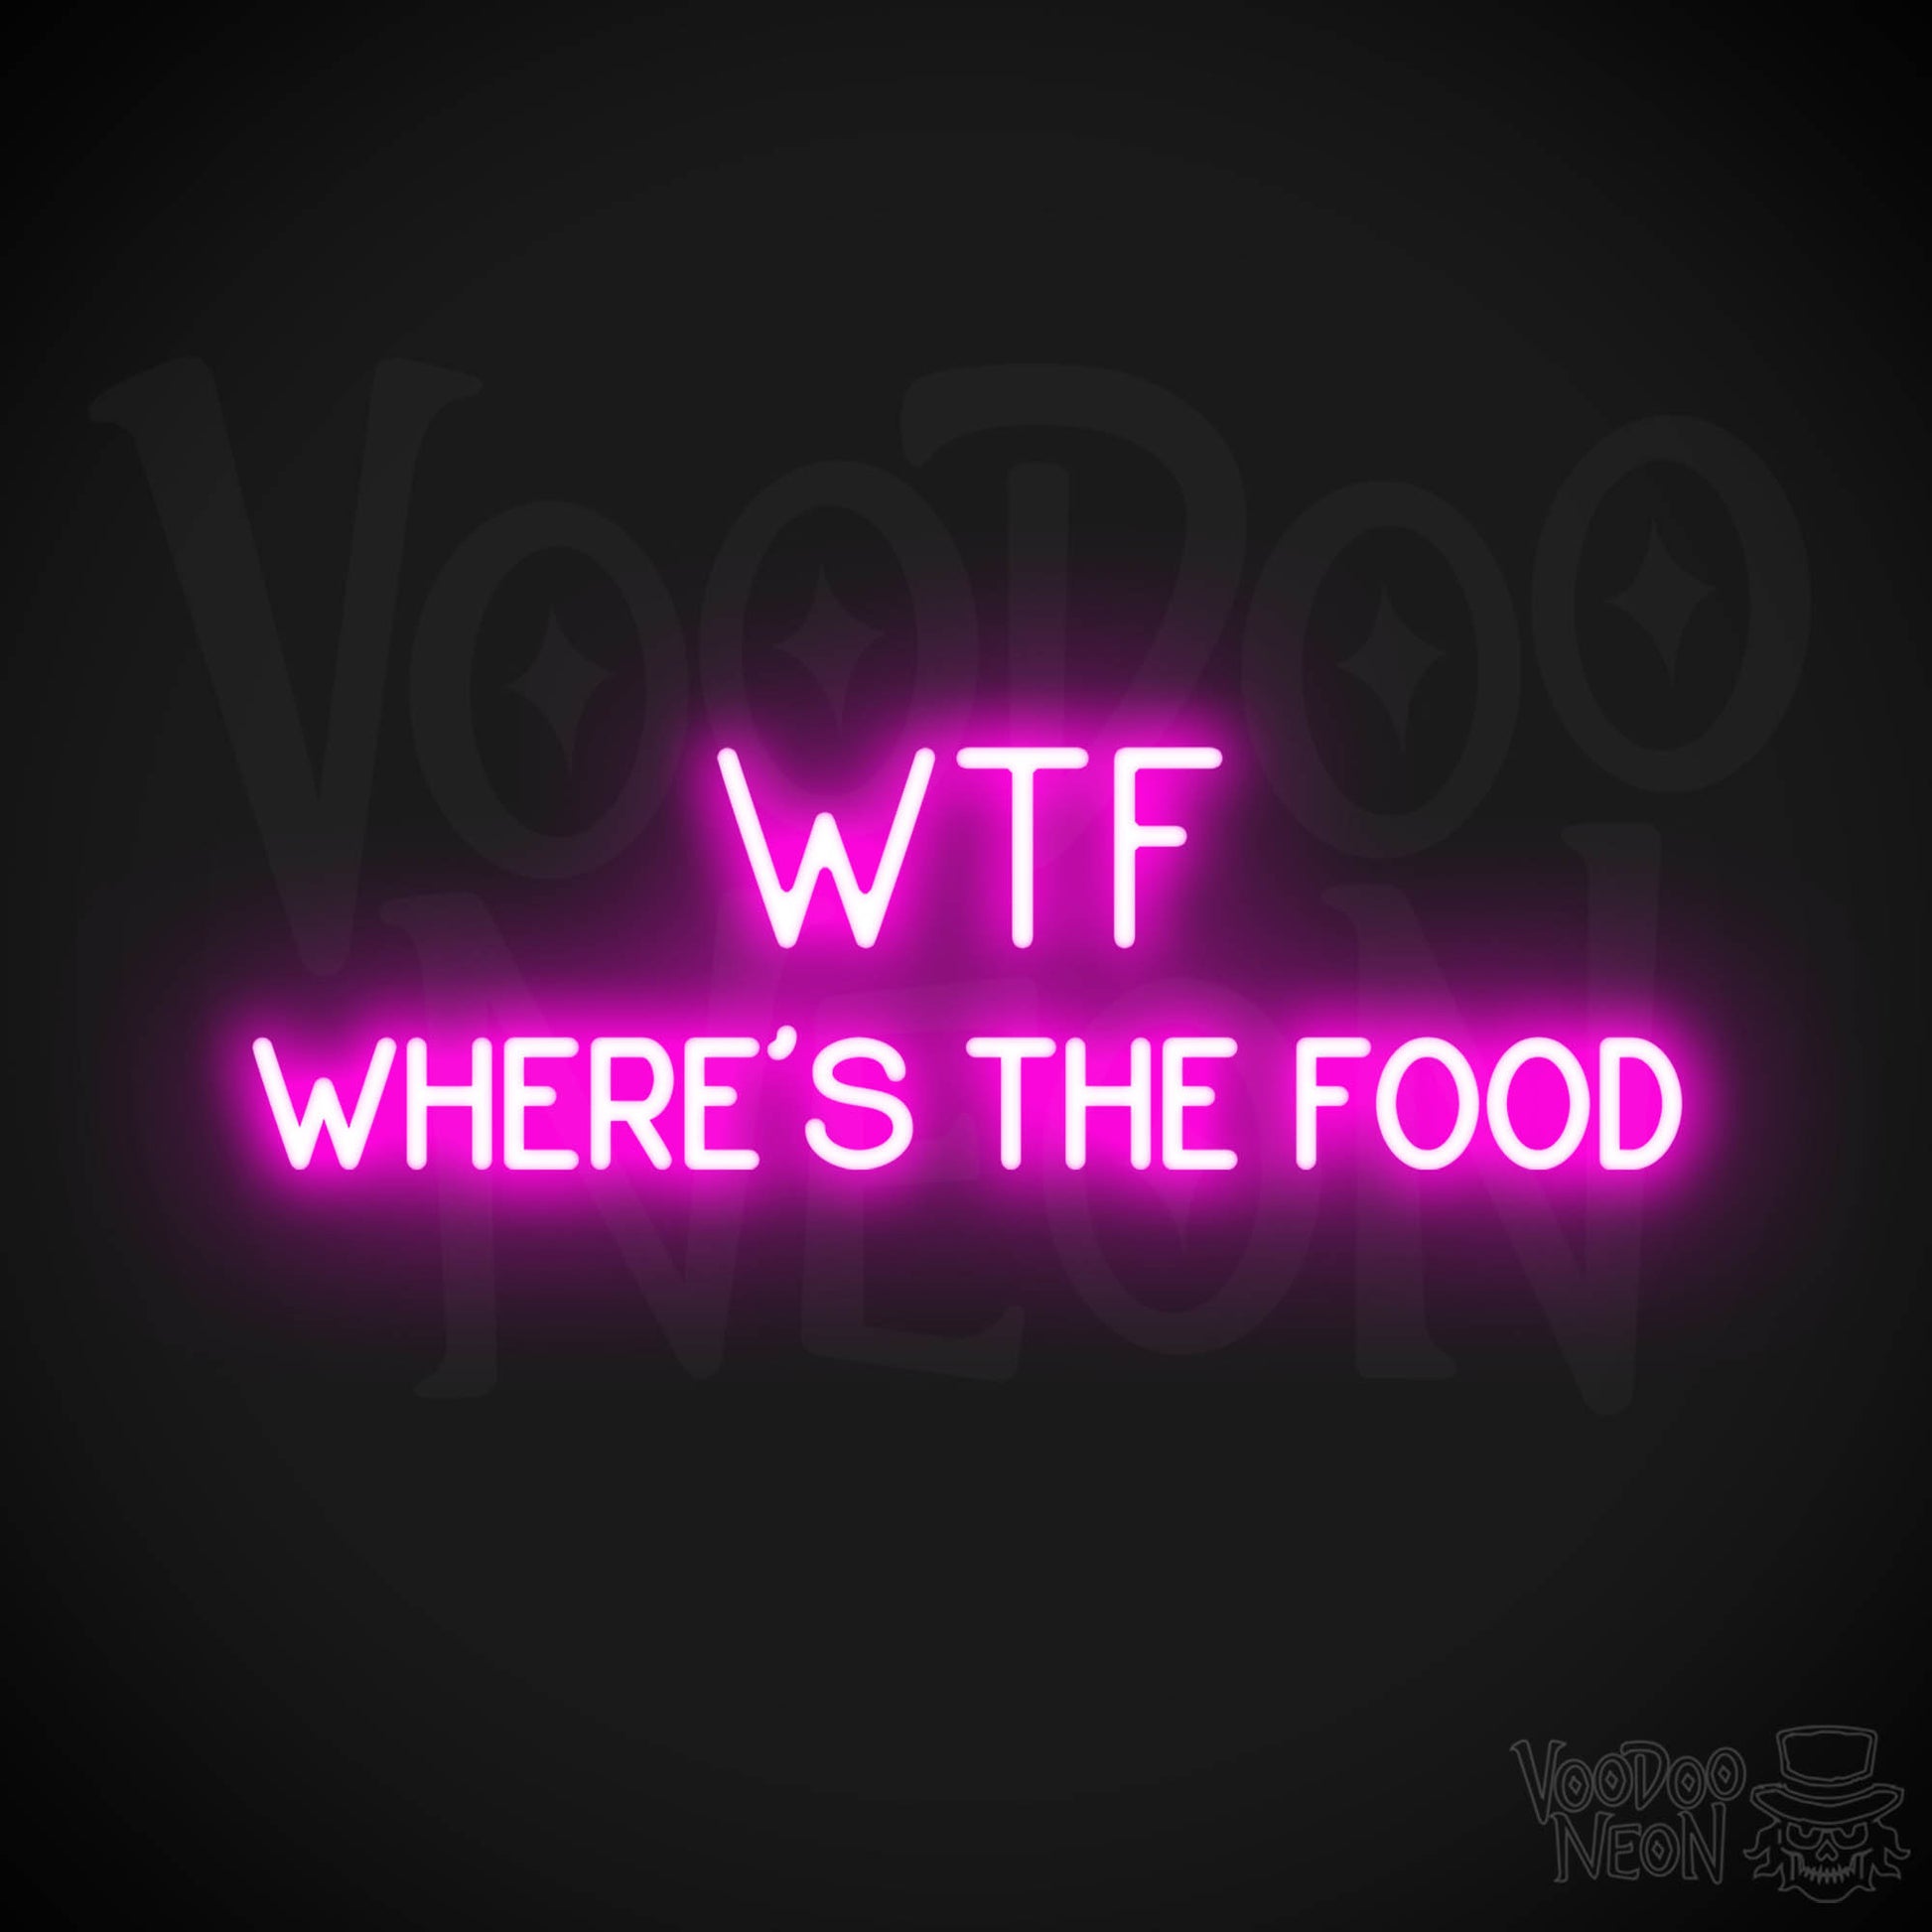 Wtf (Wheres The Food) LED Neon - Pink